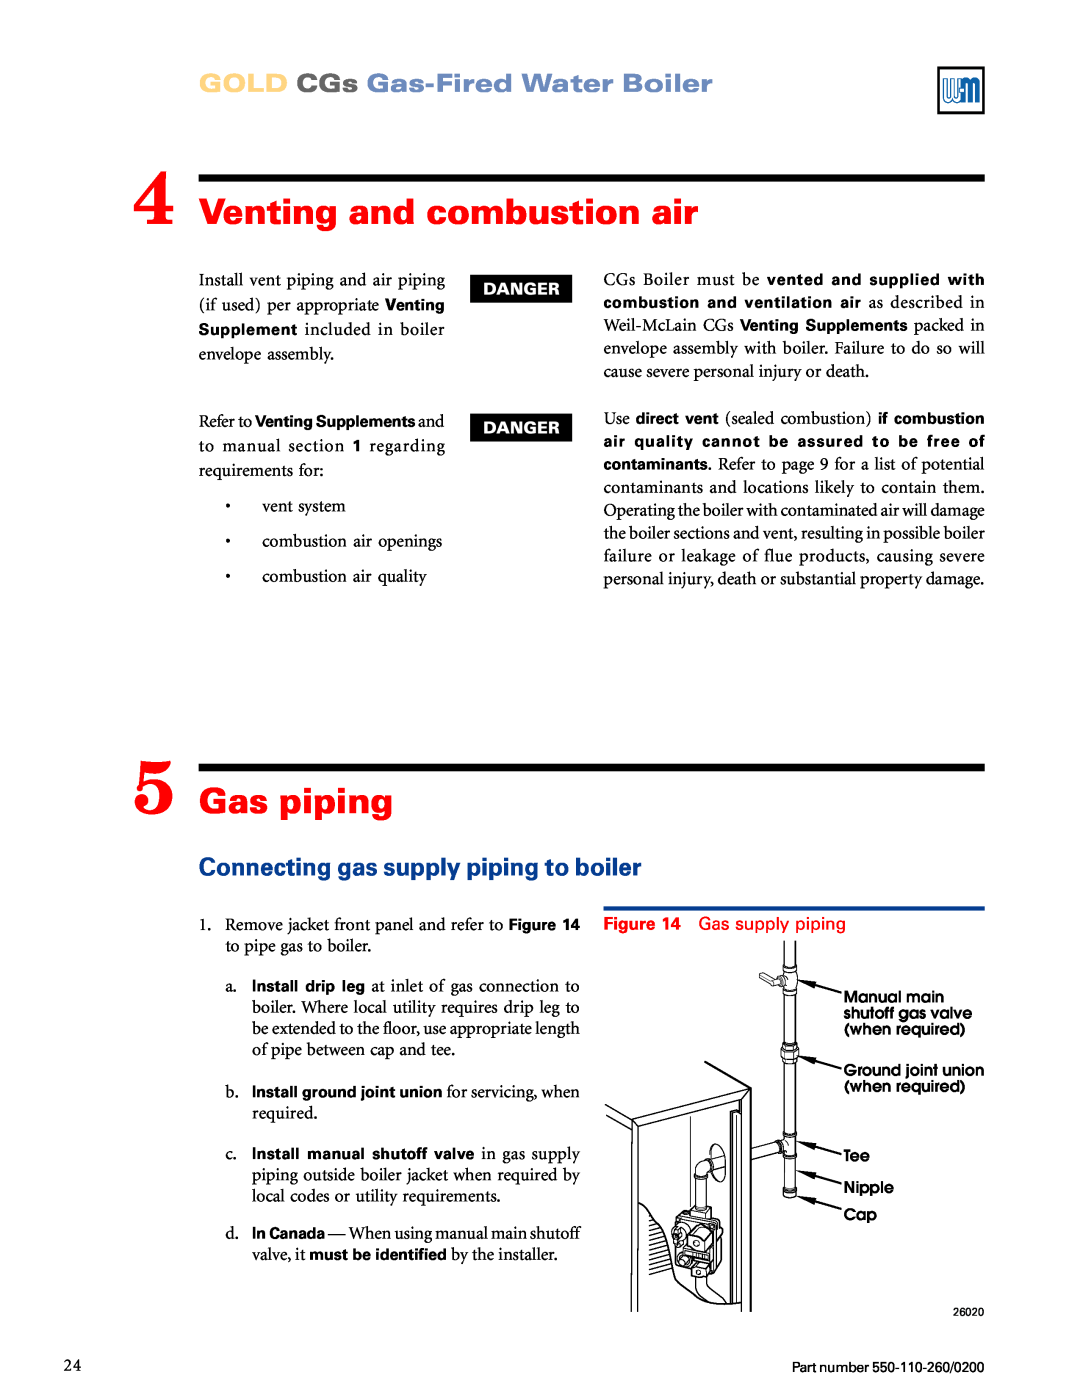 Weil-McLain 550-110-260/02002 manual 4Venting and combustion air, 5Gas piping, Connecting gas supply piping to boiler 